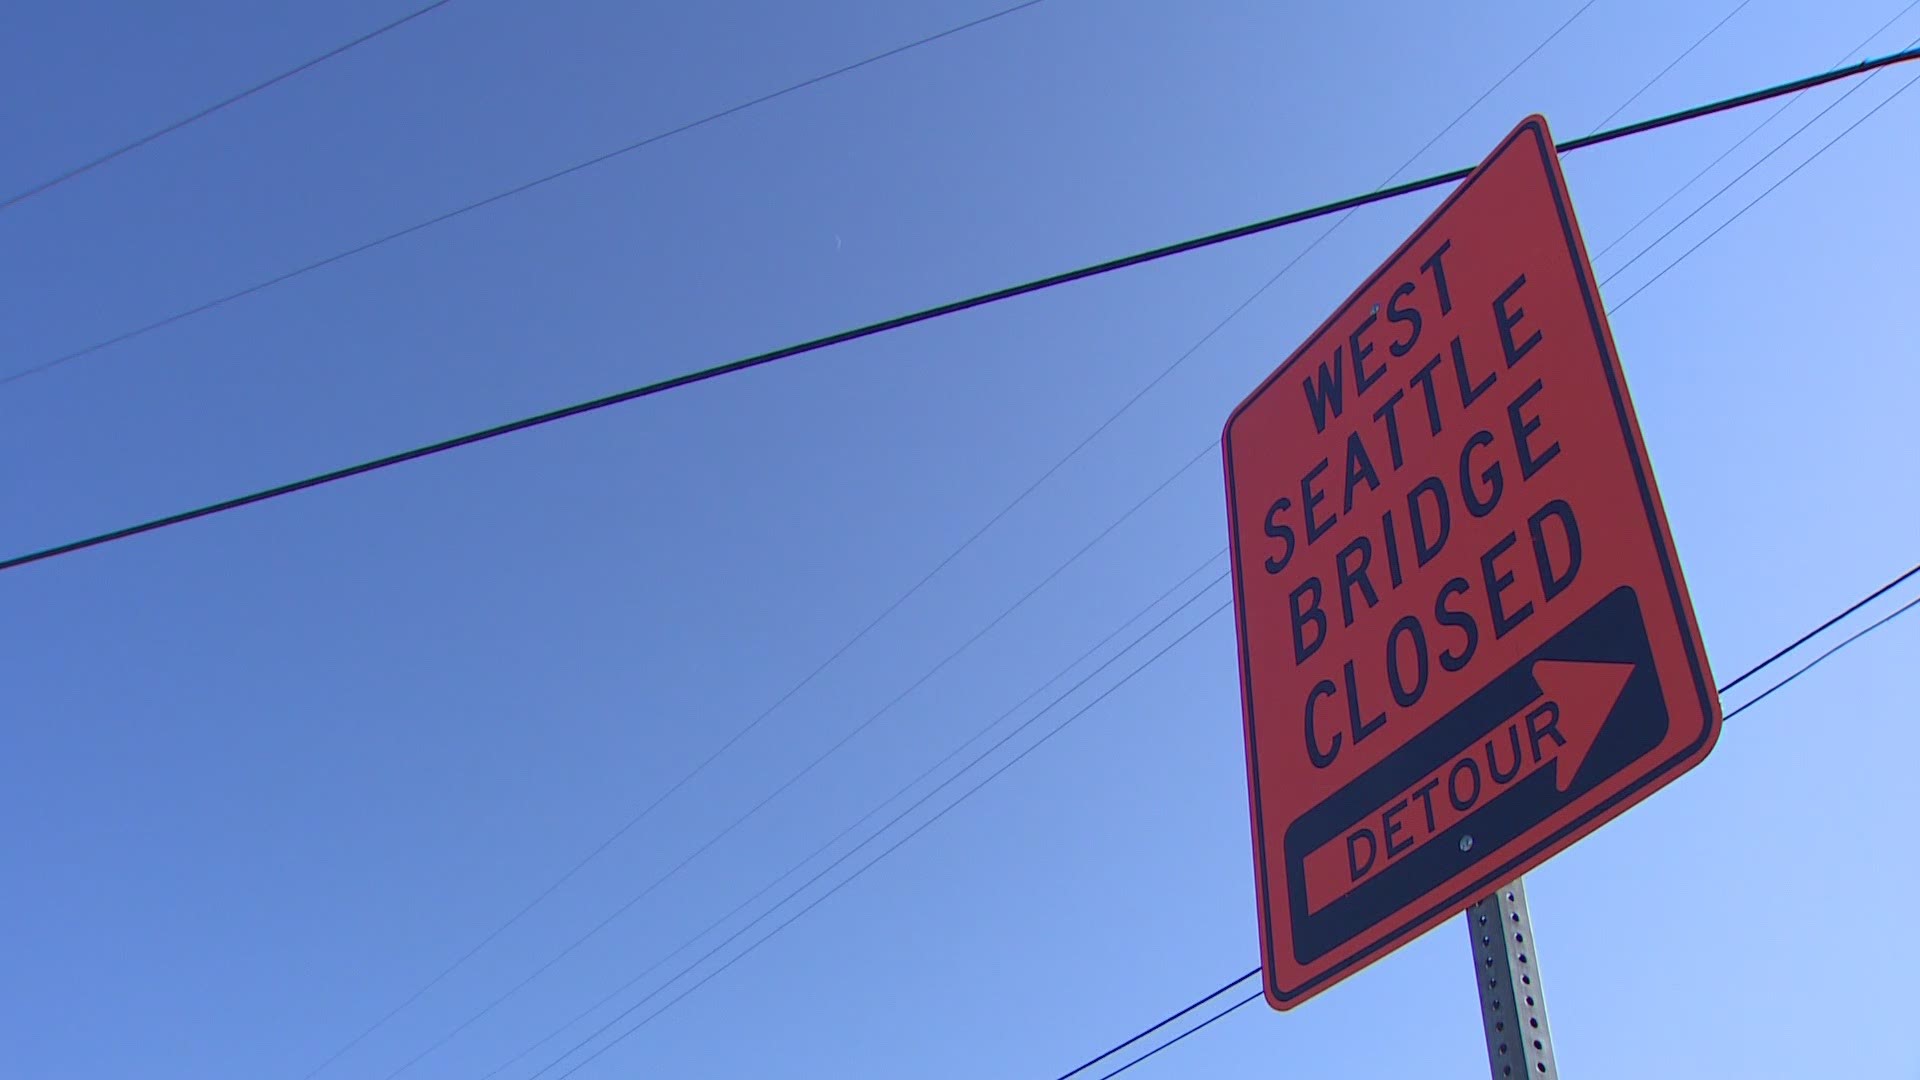 The City of Seattle says it's almost finished with designs for repairing the damaged high bridge, and it expects to reopen the bridge to traffic in mid-2022.